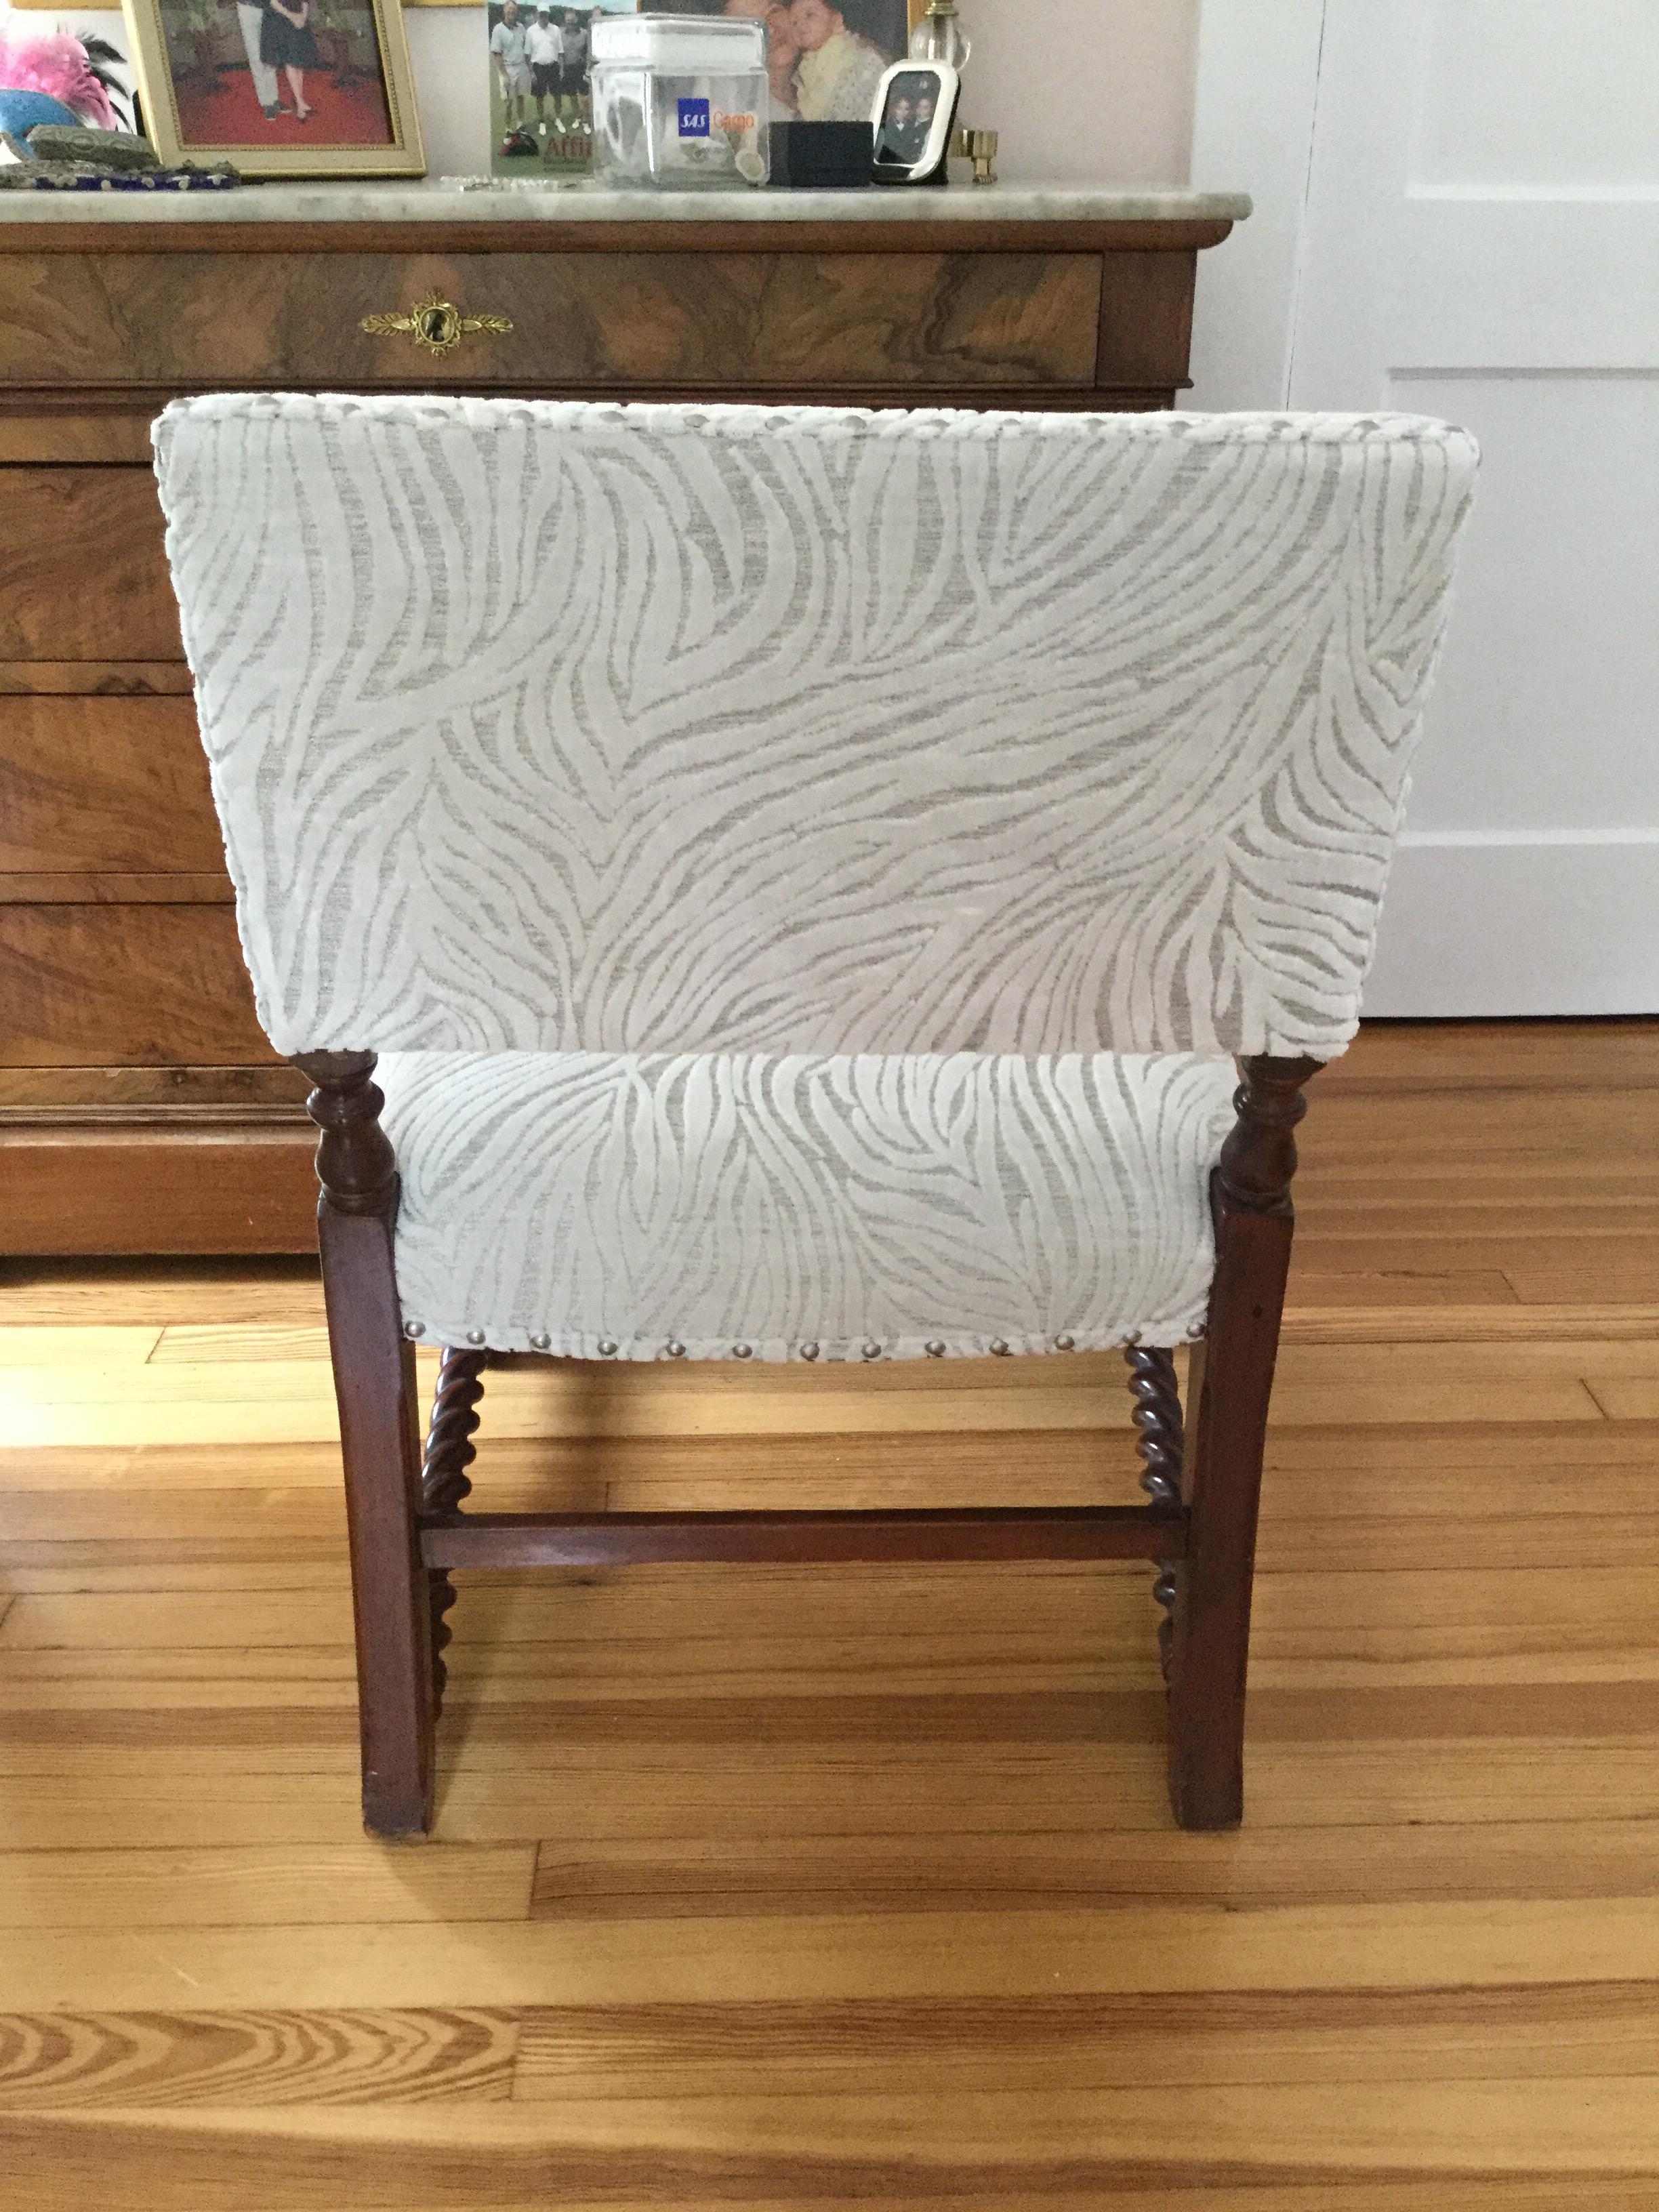 This antique English Barley-Twist chairs has been given a new look with a stunning white and silver thread velvet upholstery. The barley-twist turned legs and arms have a rich patina while the new upholstery is in perfect condition. Silver nailheads